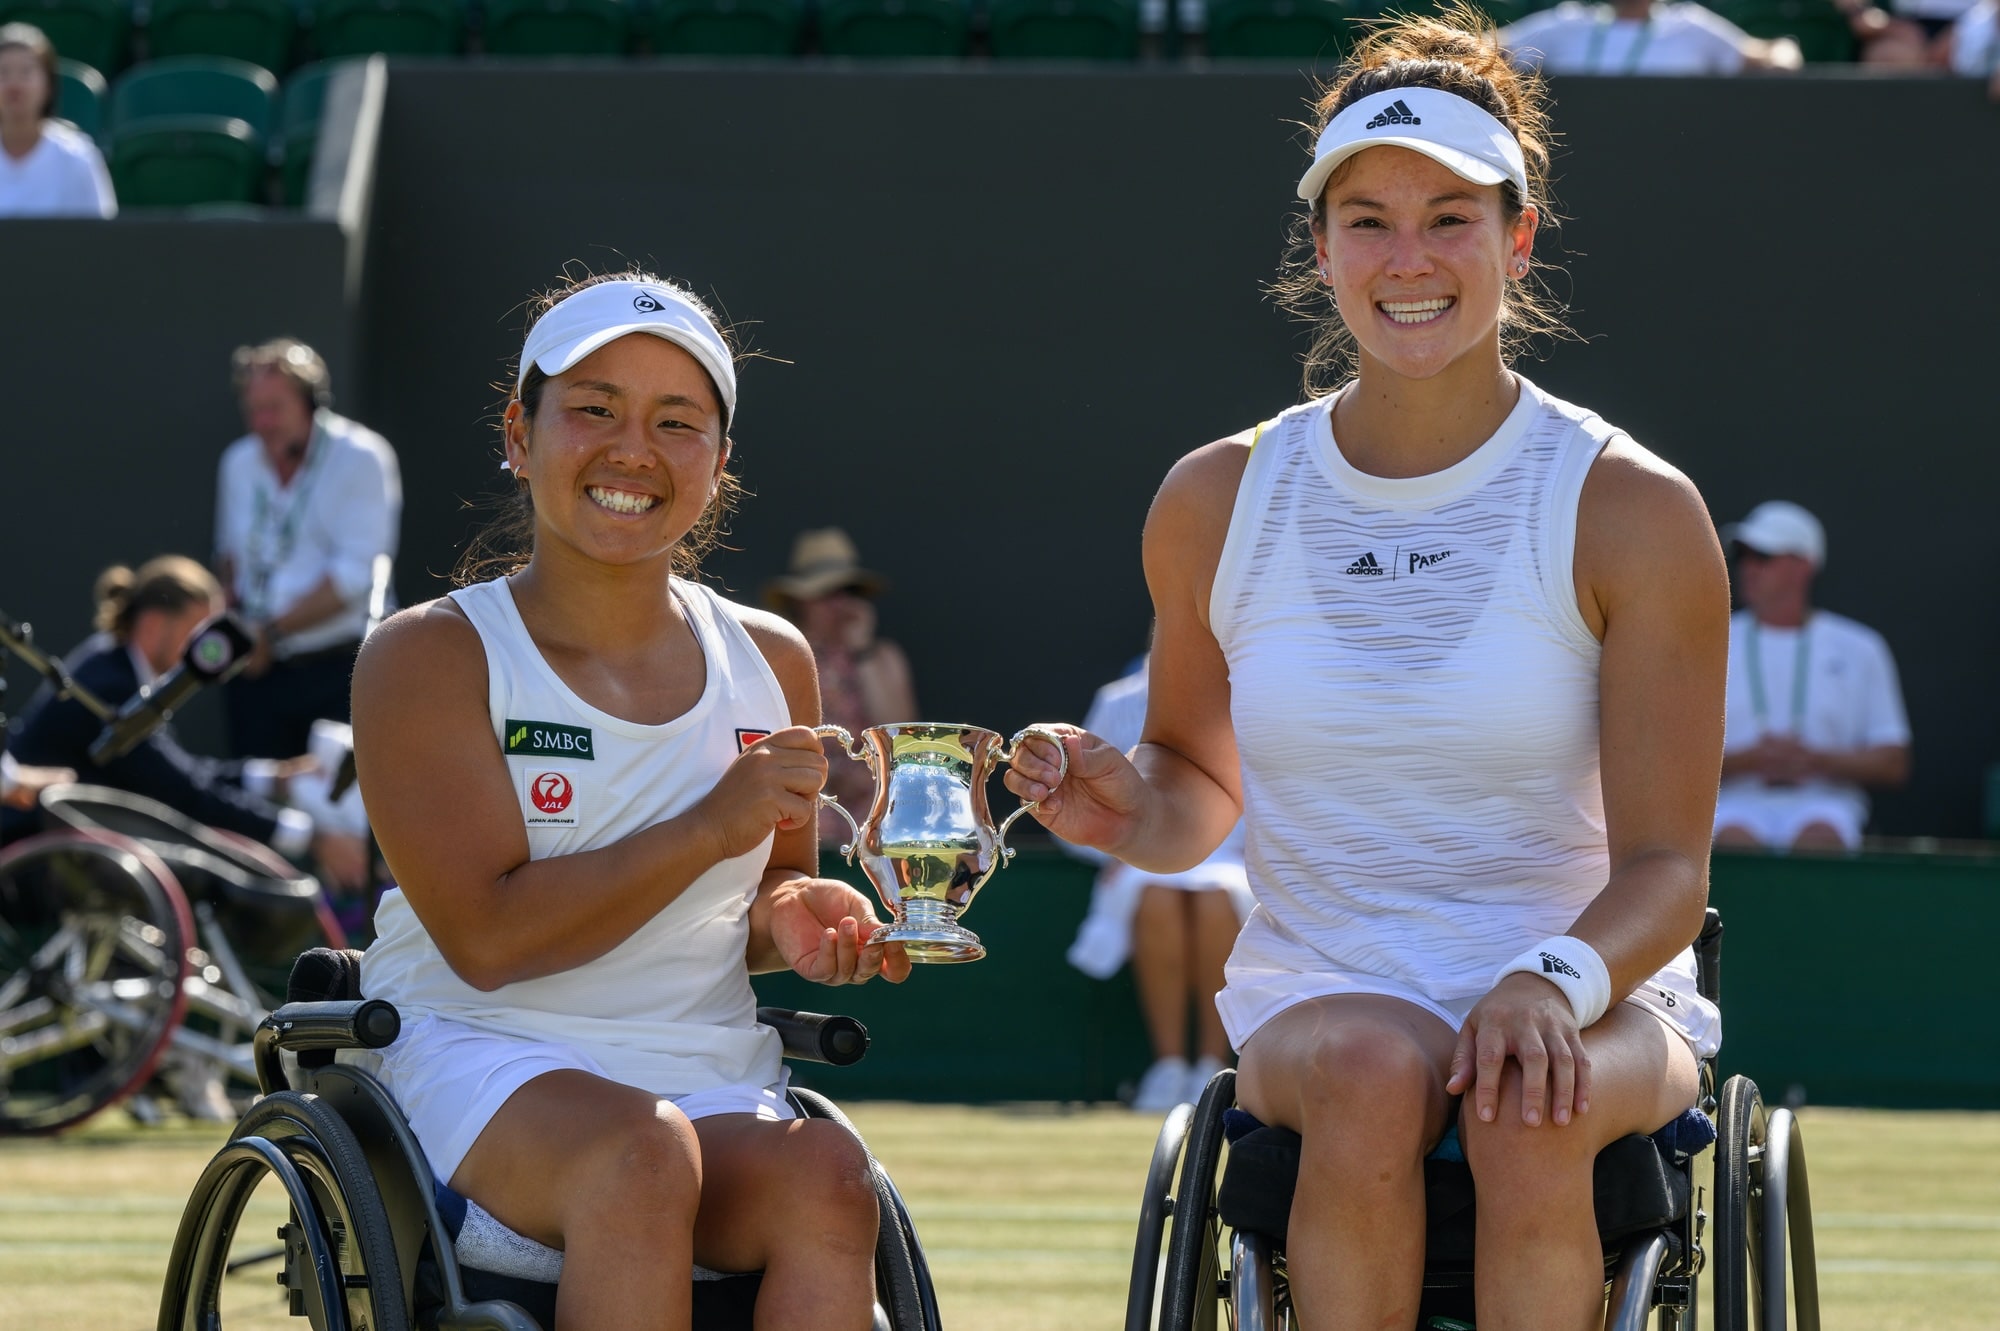 Japanese wheelchair tennis player Yui Kamiji and American wheelchair tennis player Dana Mathewson, in white, hold a trophy together at Wimbledon.